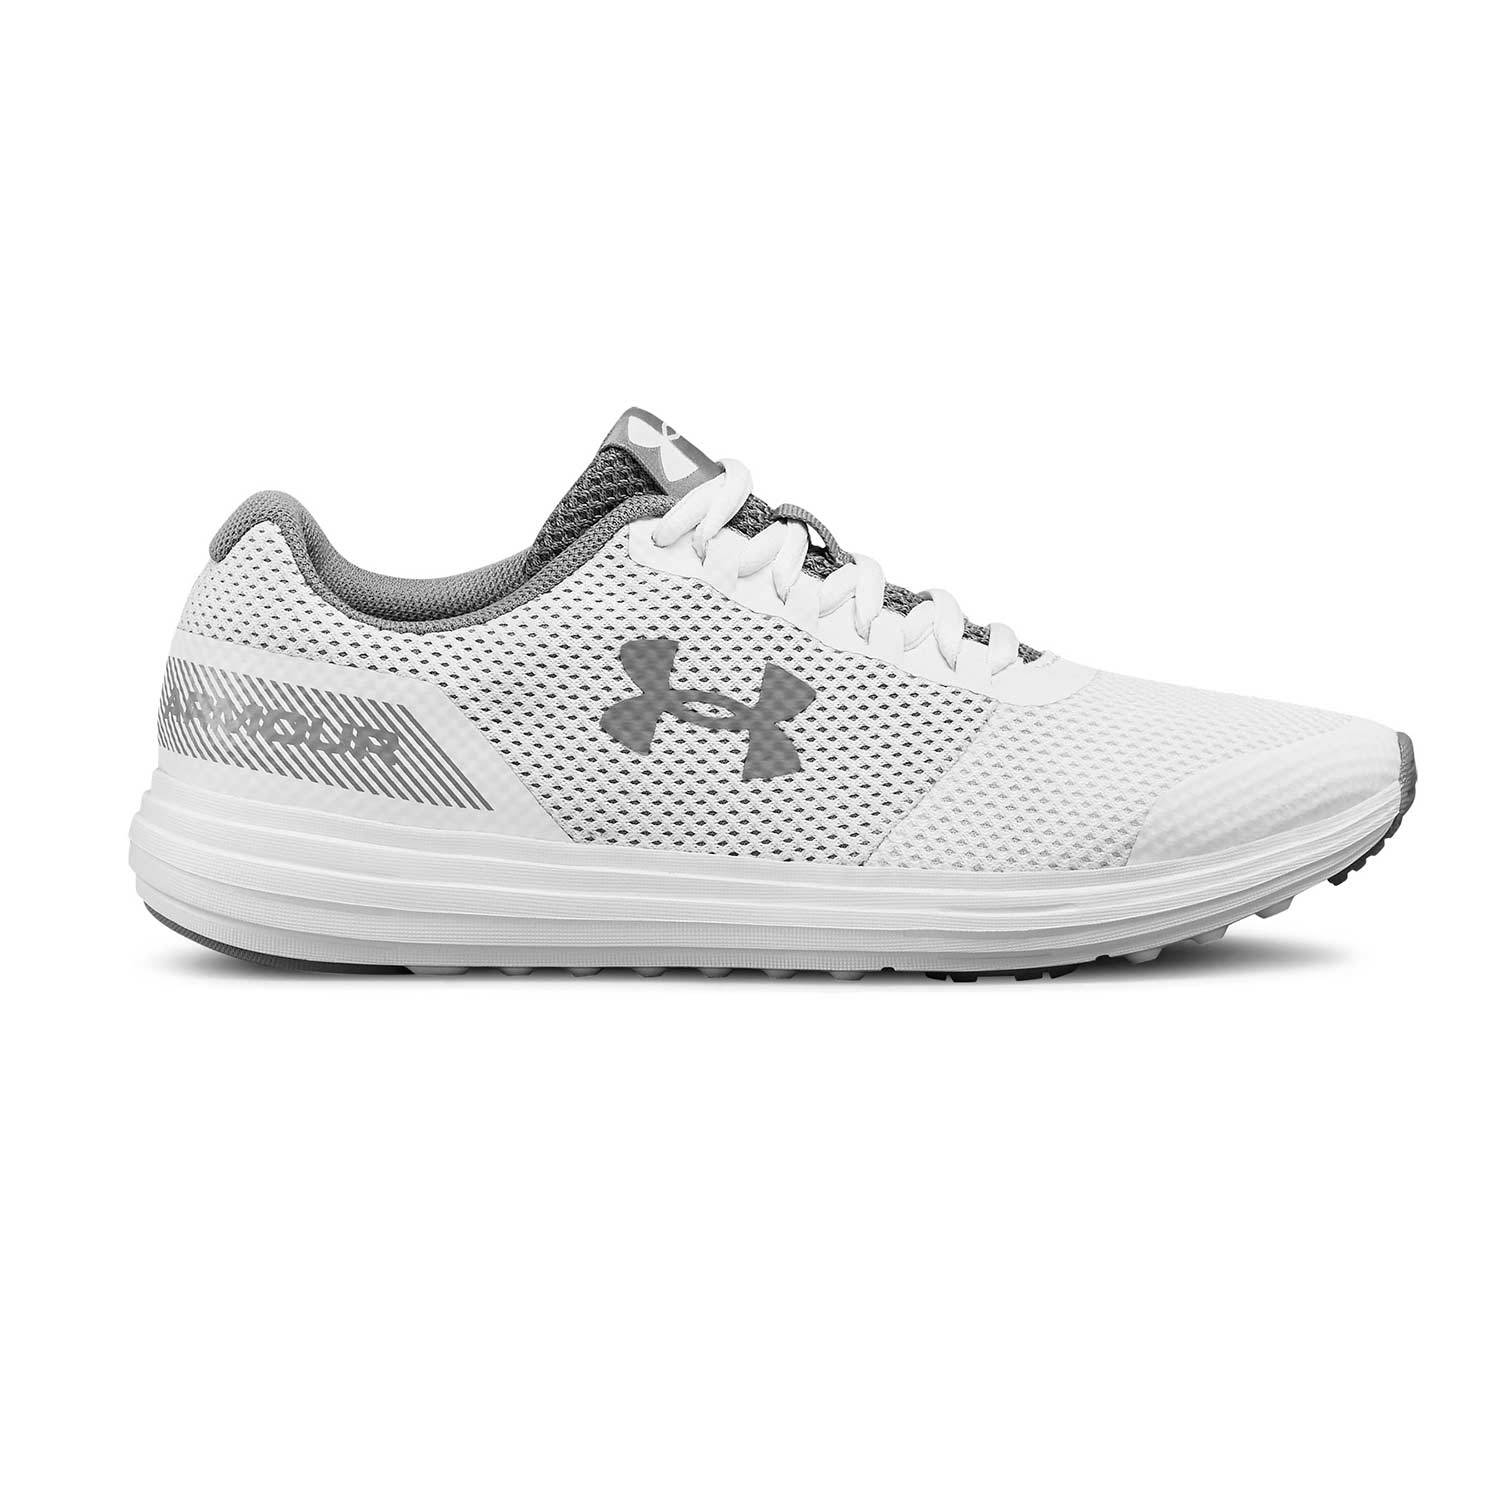 under armor surge running shoes